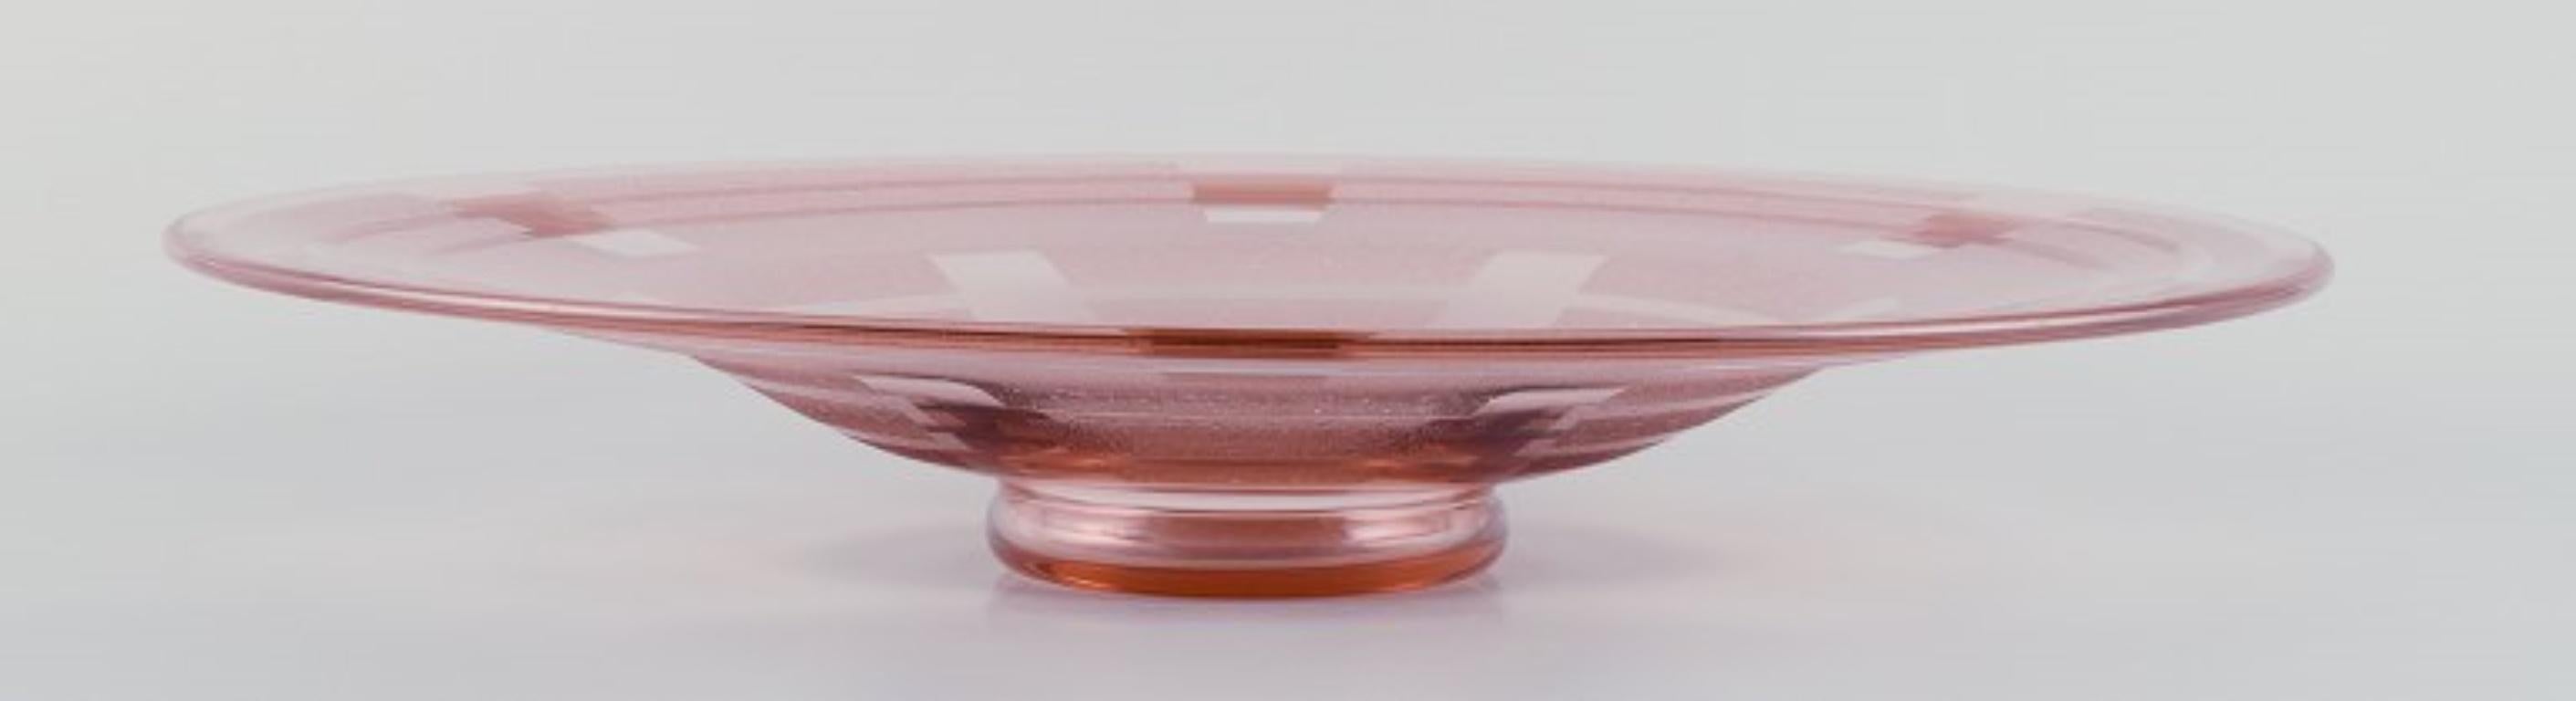 Schneider, France. 
Colossal Art Deco pink art glass bowl.
Geometric pattern in frosted glass.
Approximately 1940.
Stamped on the base.
In excellent condition.
Dimensions: Diameter 41.5 cm, Height 6.5 cm.